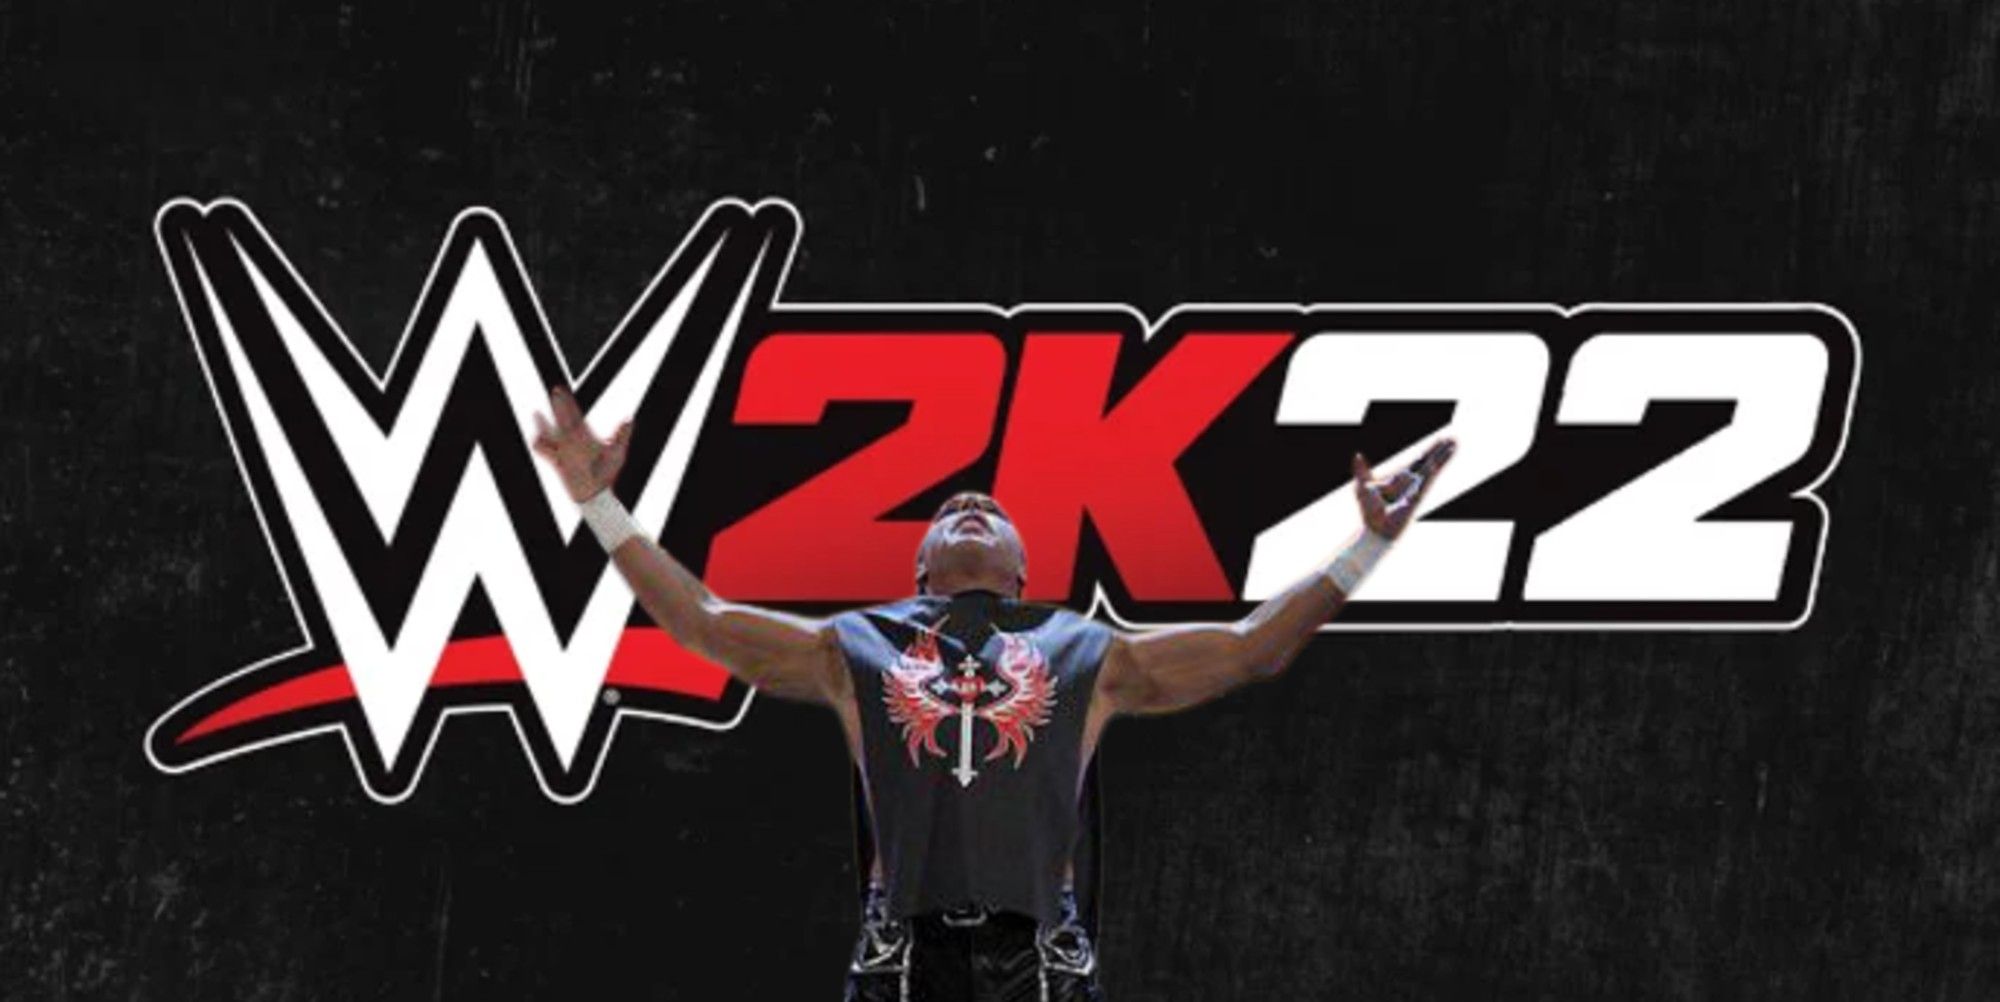 Wwe 2k22 S Delay Has Me Hopeful Things Will Be Different This Time